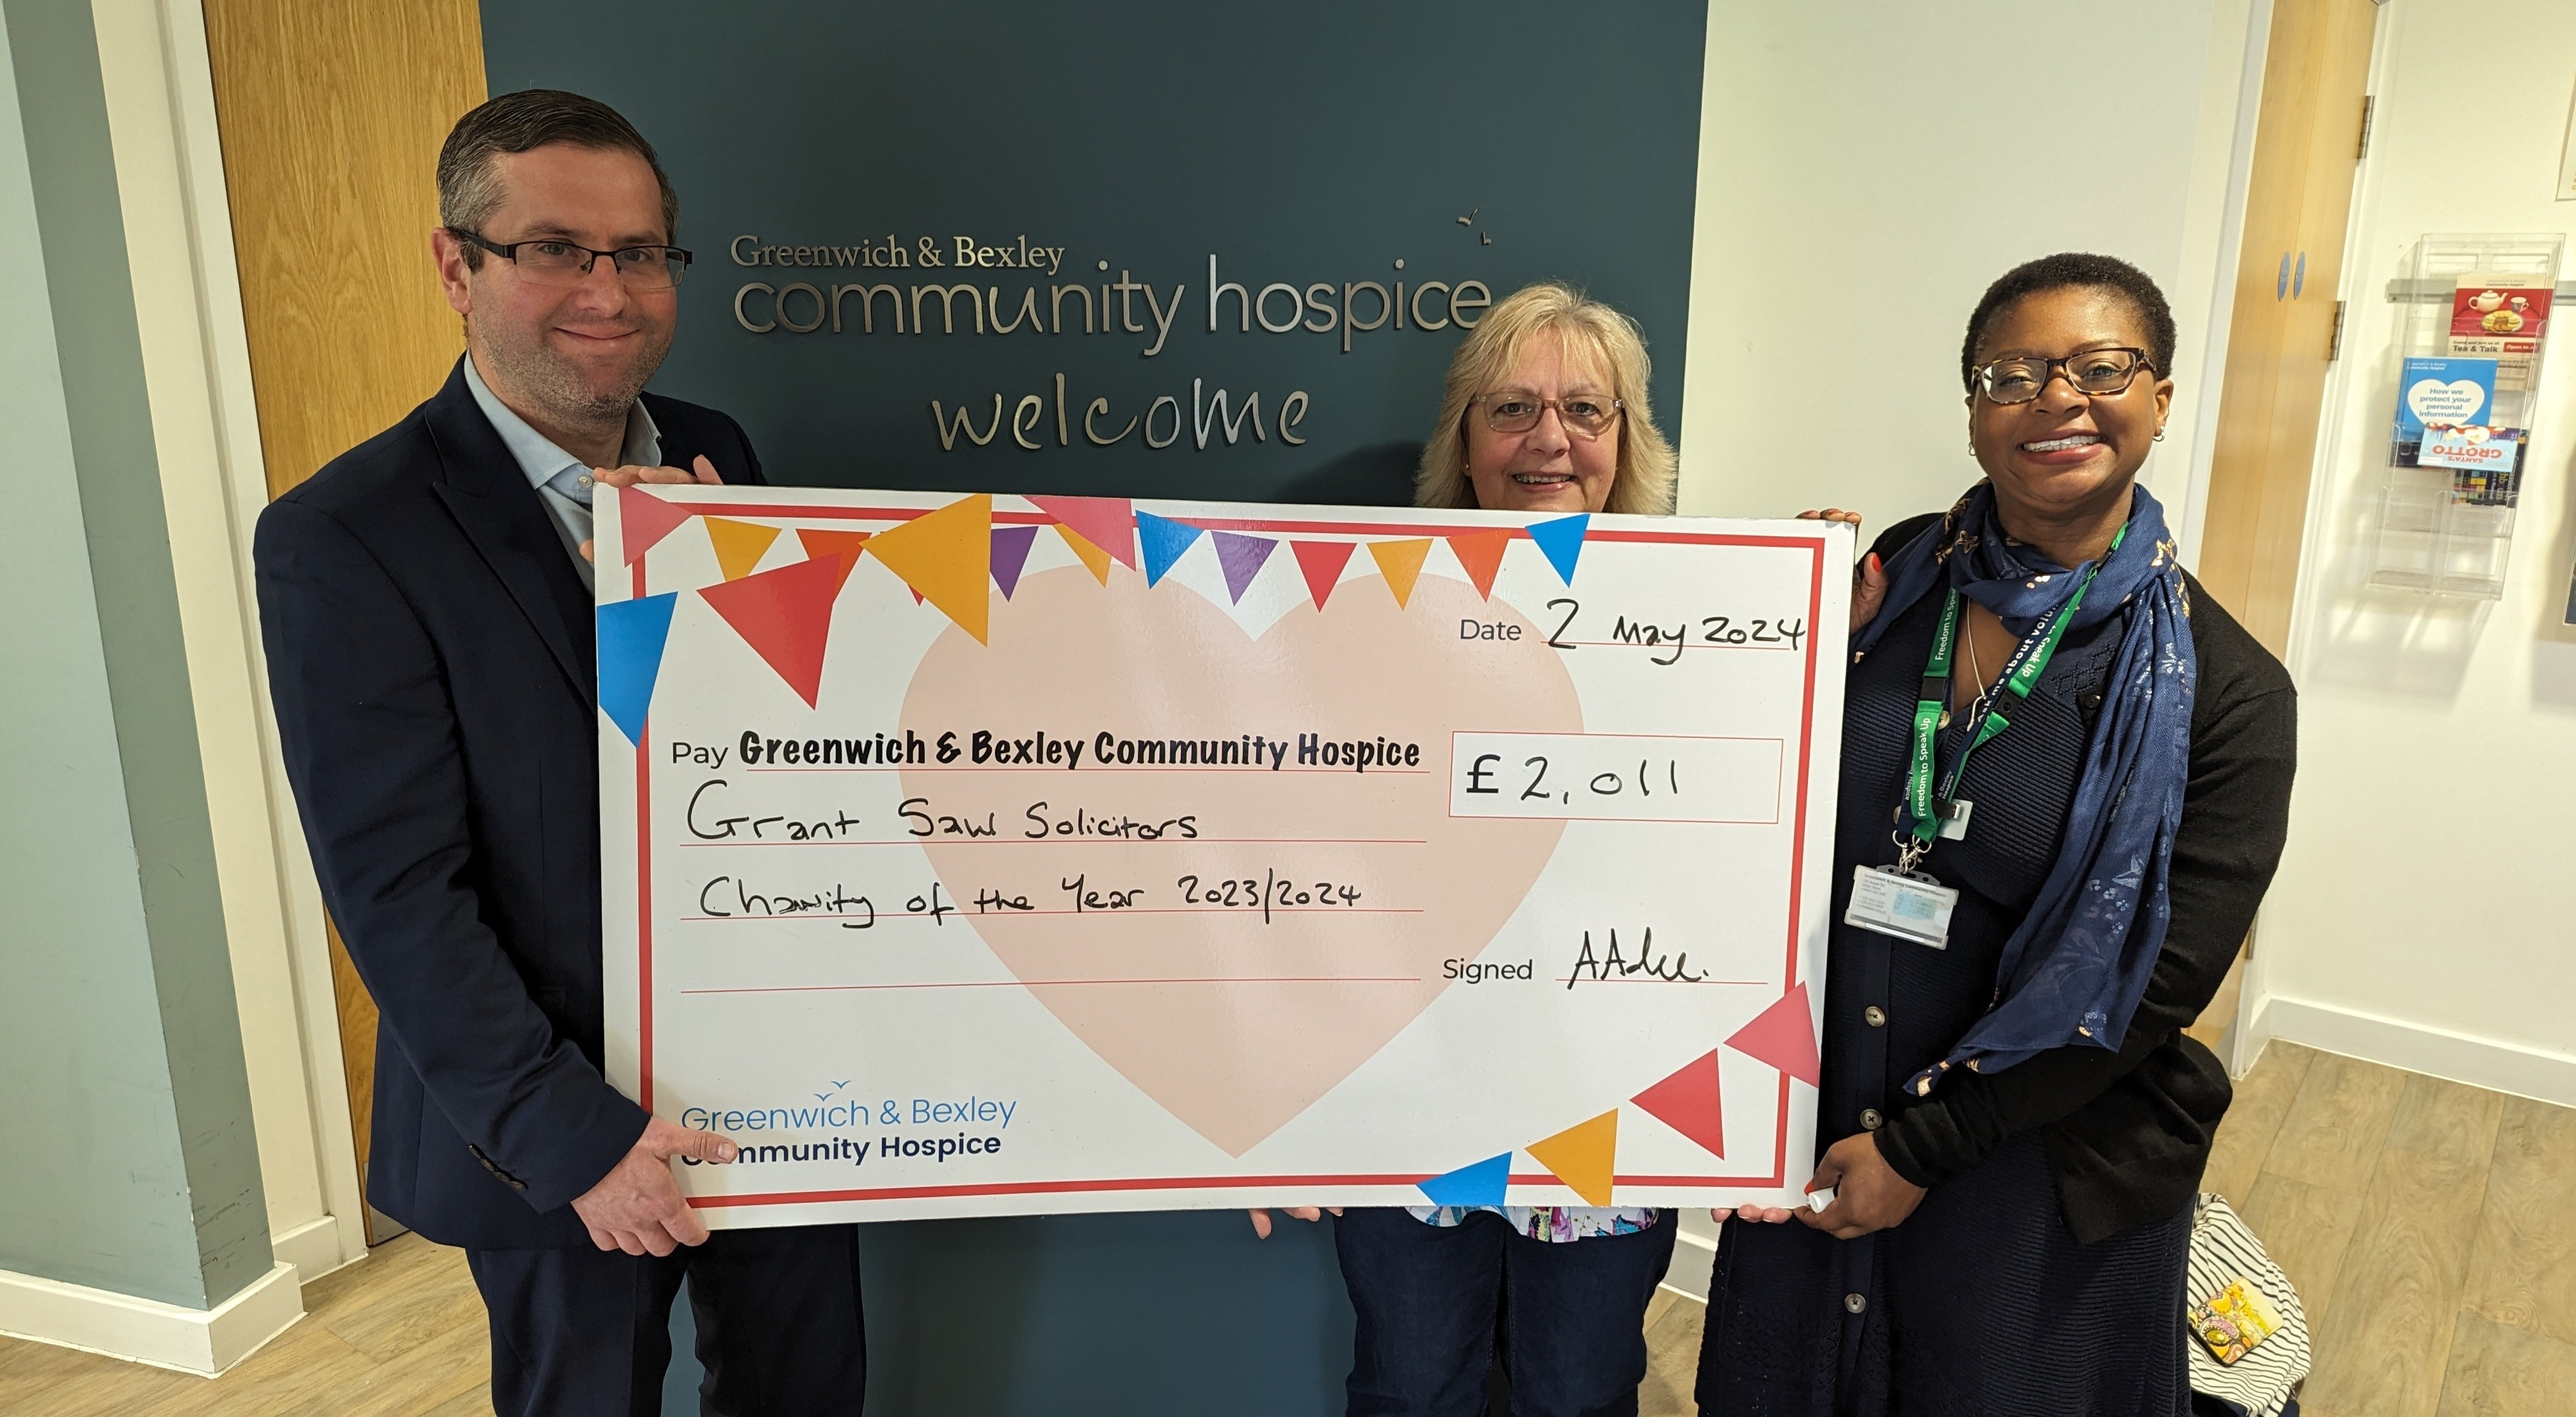 Grant Saw raise over £2,000 for GBCH